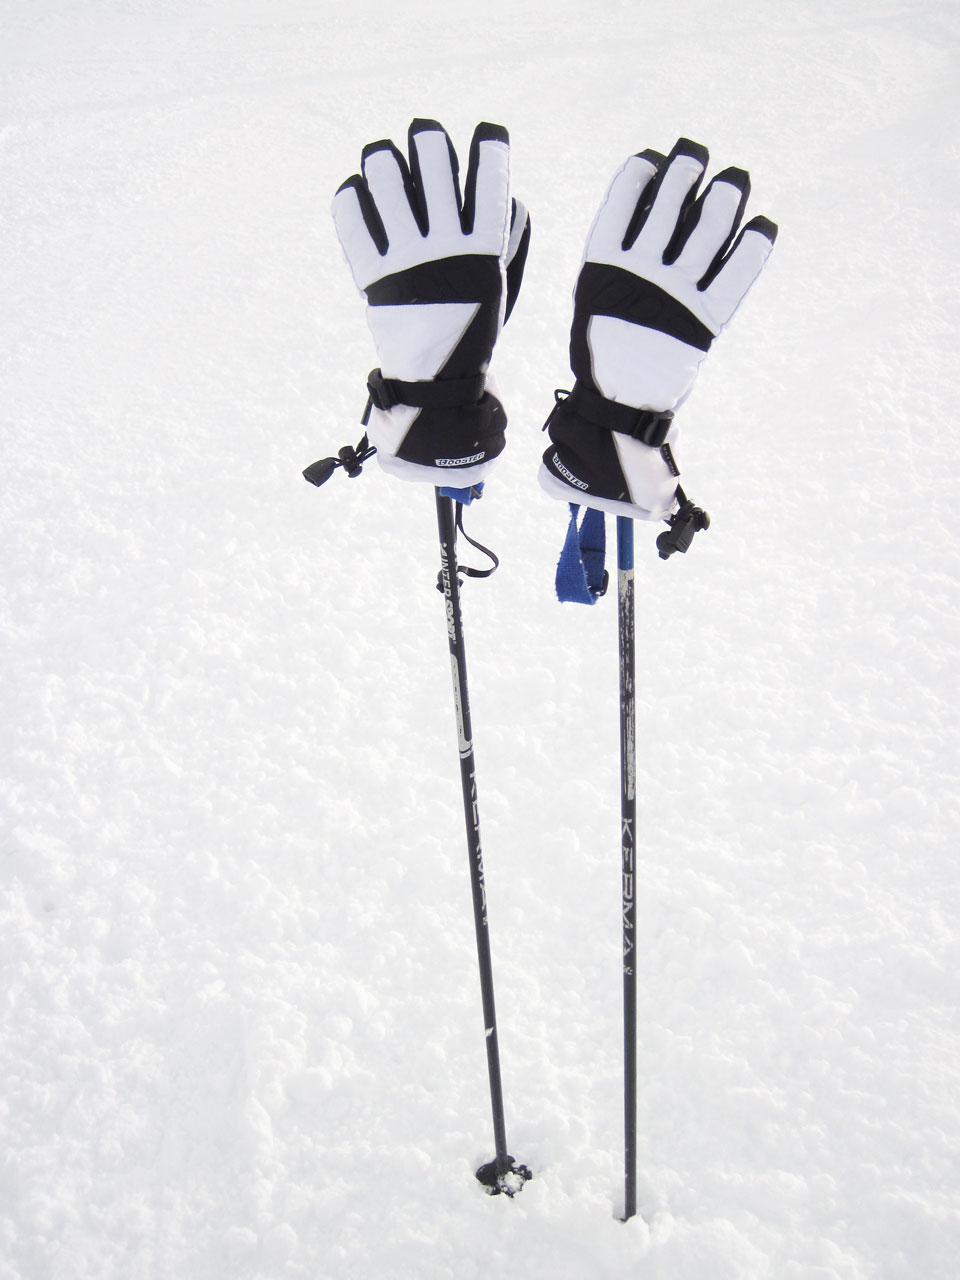 ski poles in snow with gloves on them